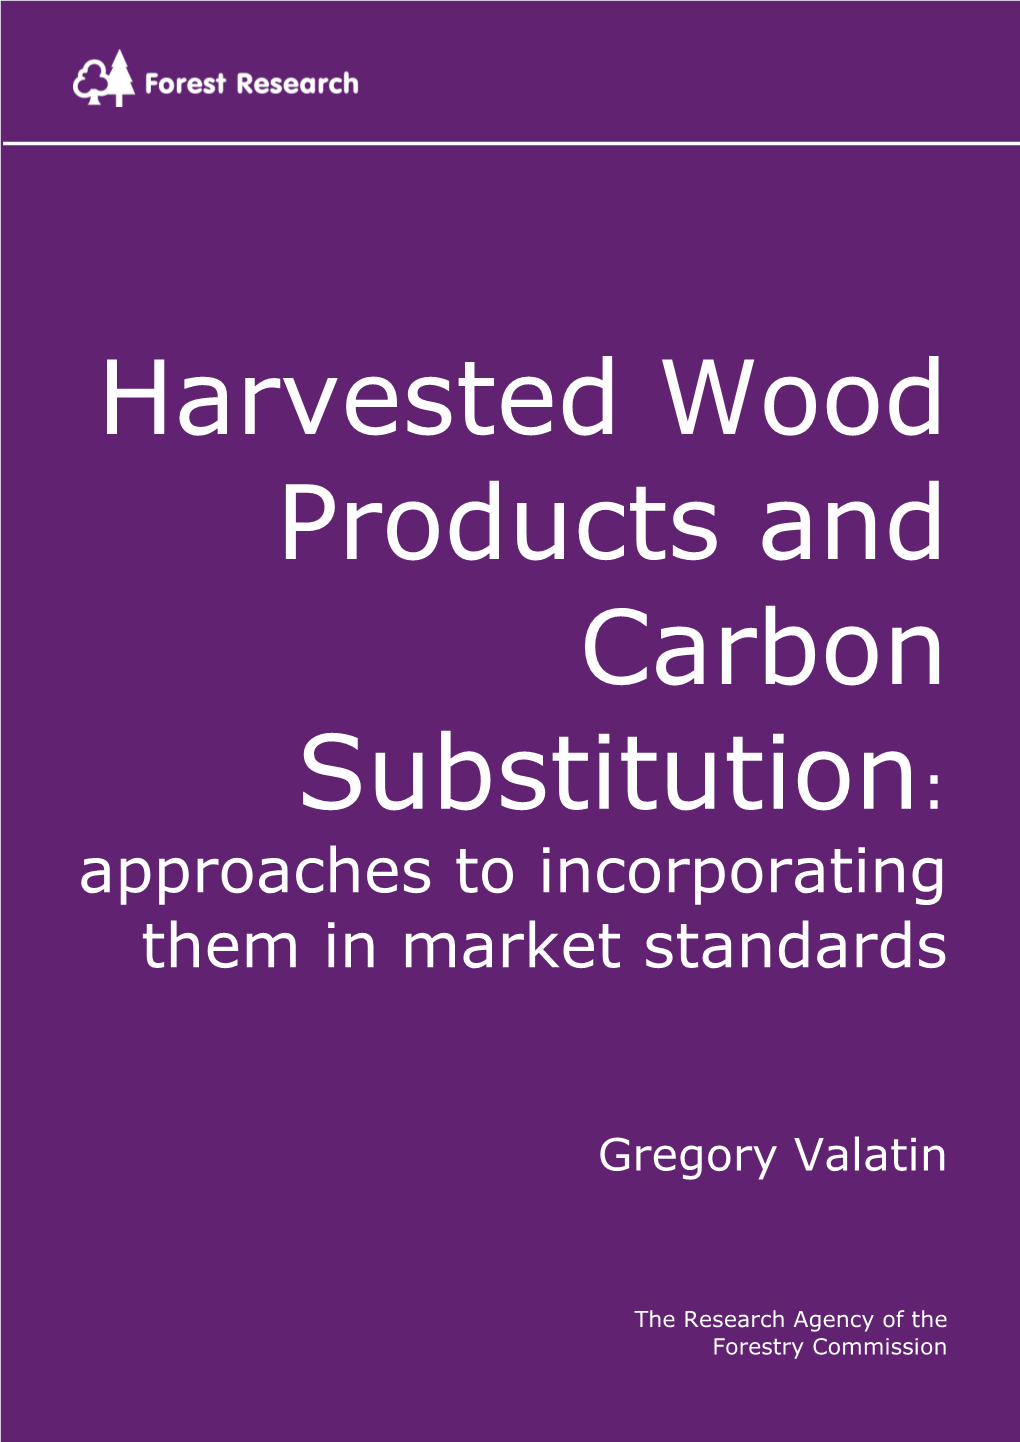 Harvested Wood Products and Carbon Substitution: Approaches to Incorporating Them in Market Standards